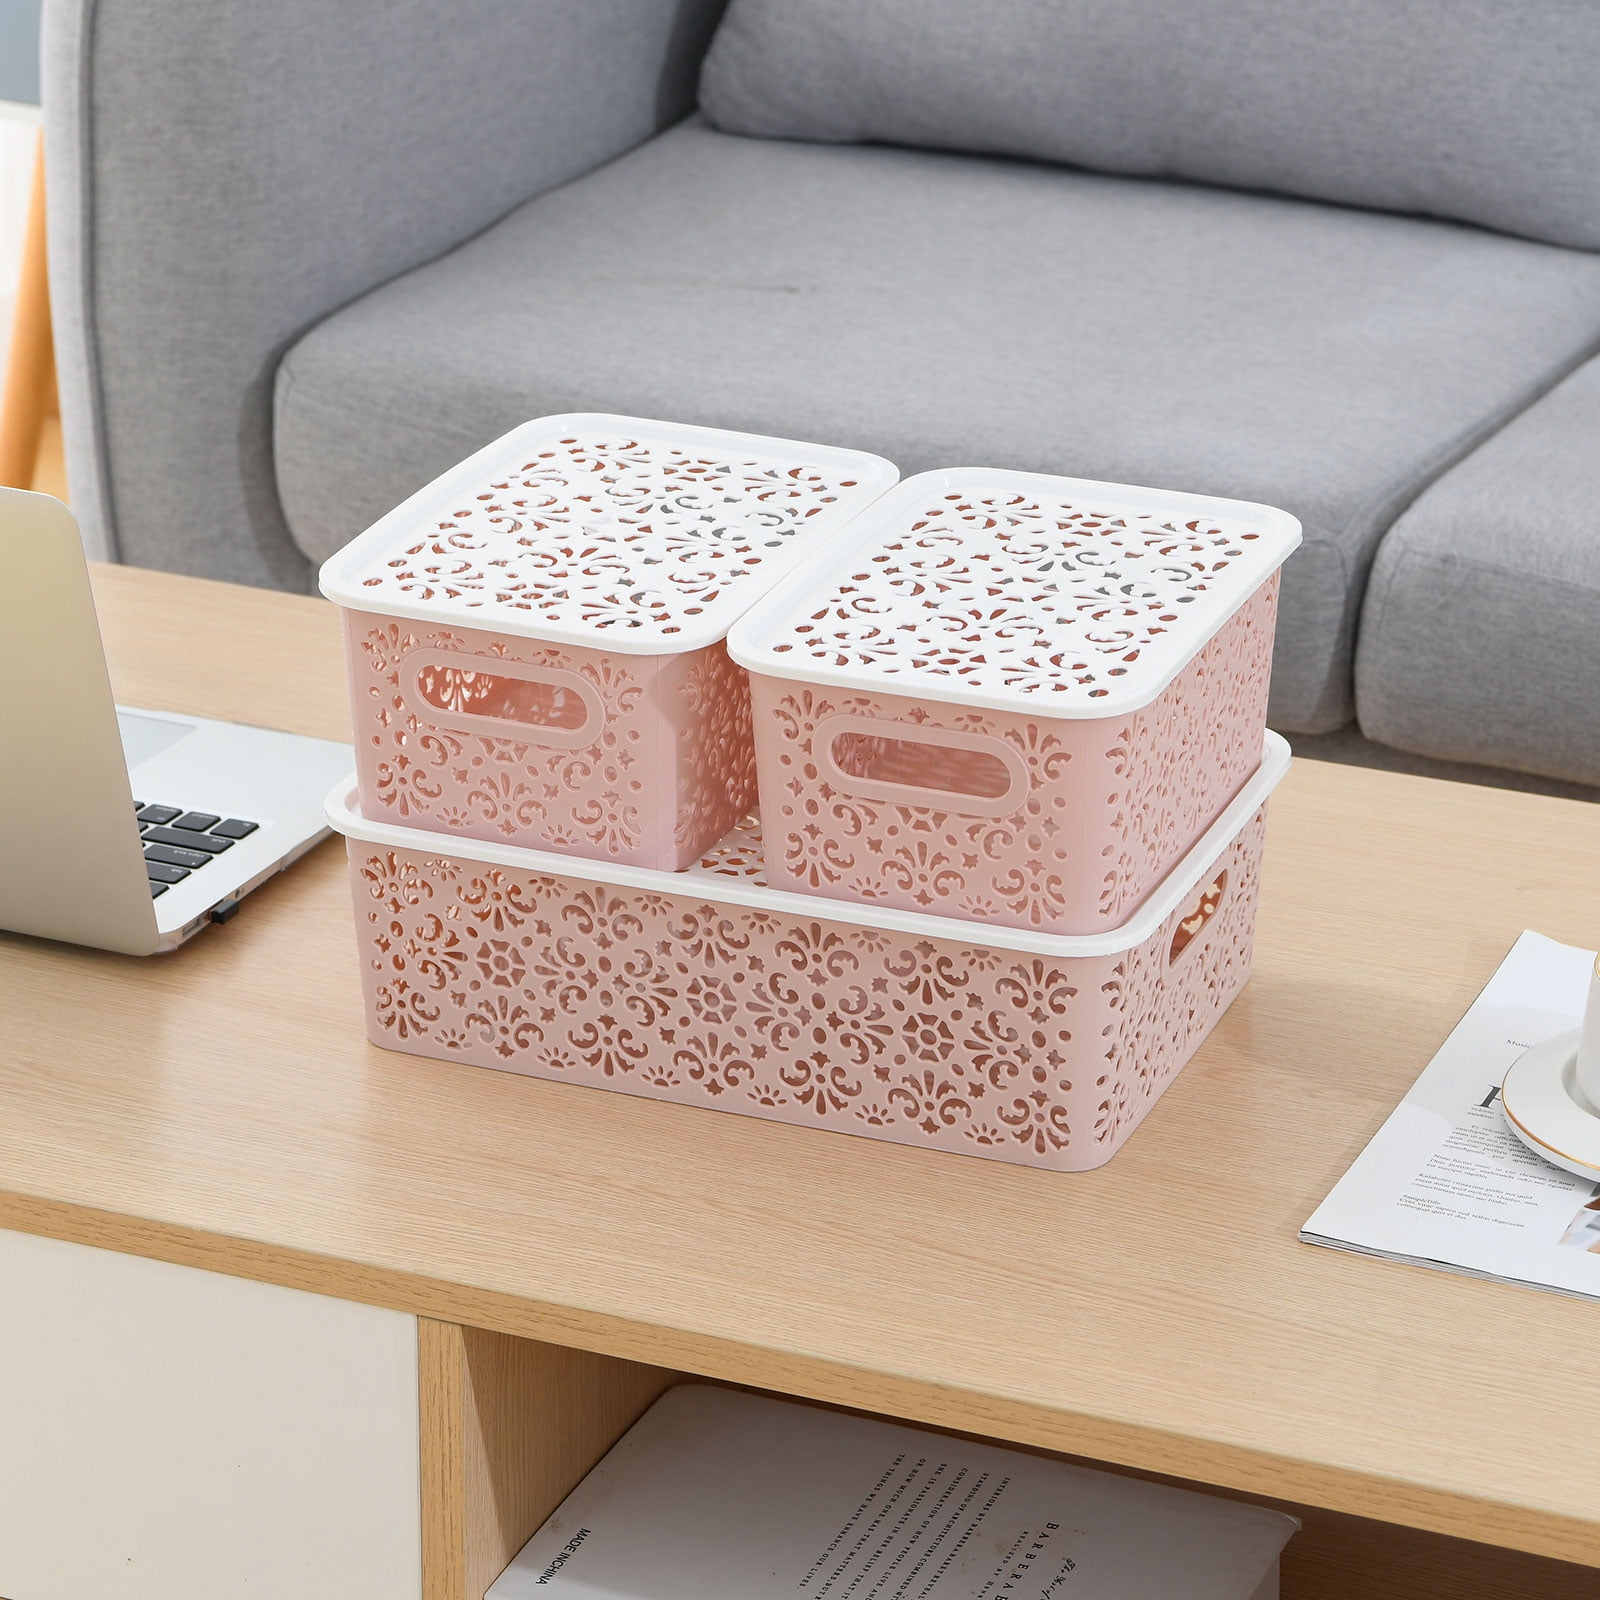 Sets of 3 Stackable Lace-Design Bins with Lids, The Lakeside Collection